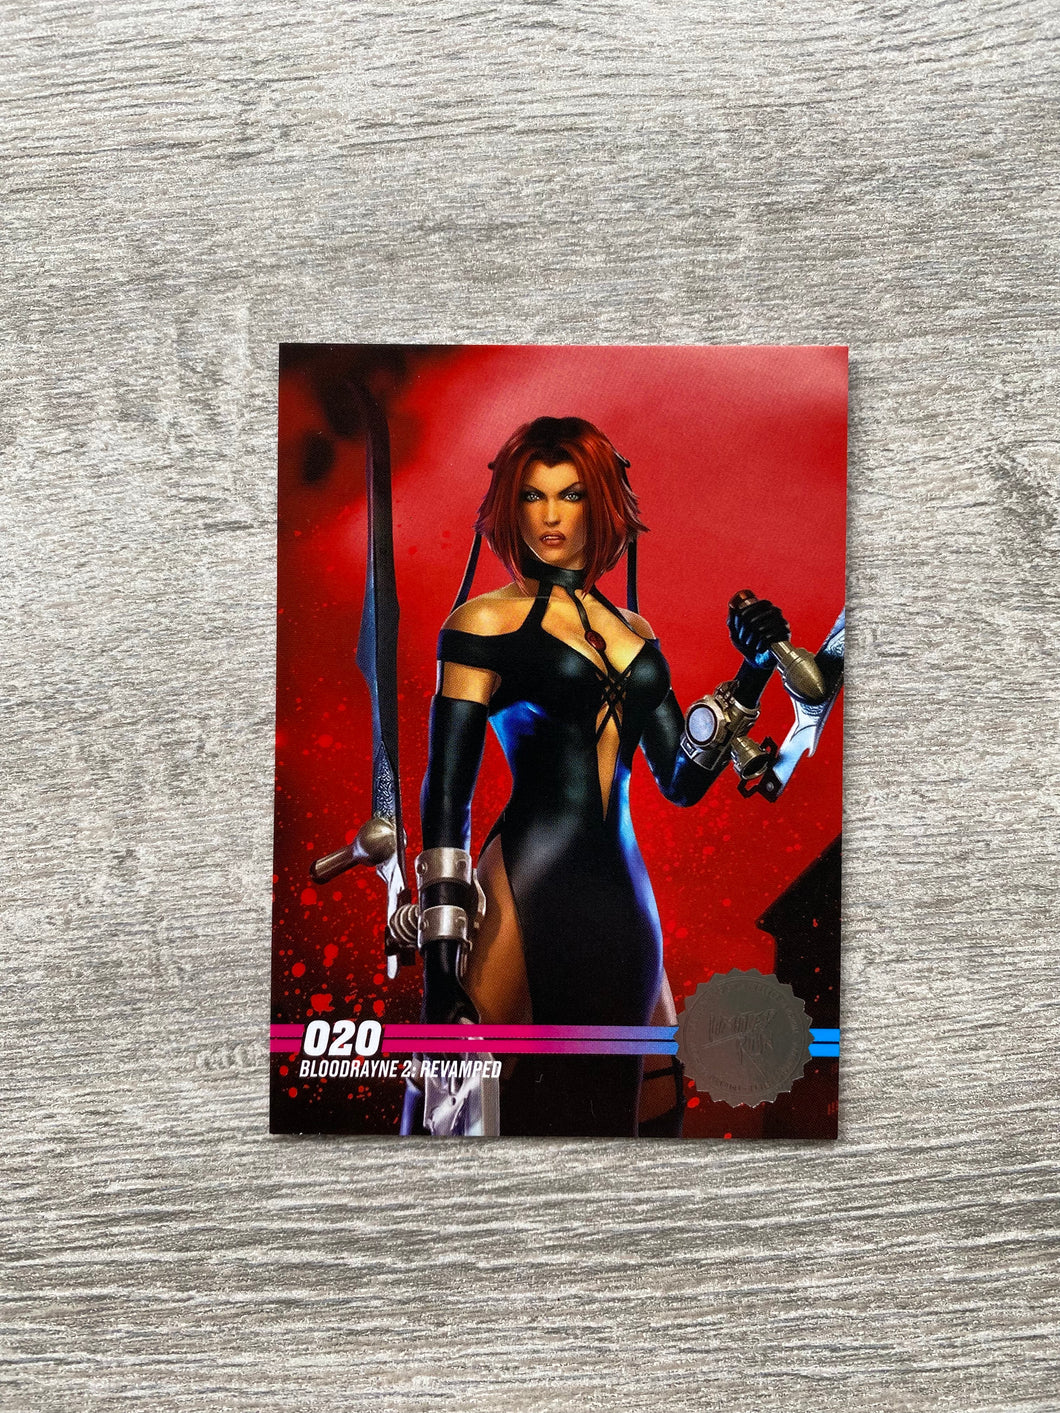 Gen3 #020 Silver Bloodrayne 2: Revamped Limited run games Trading card